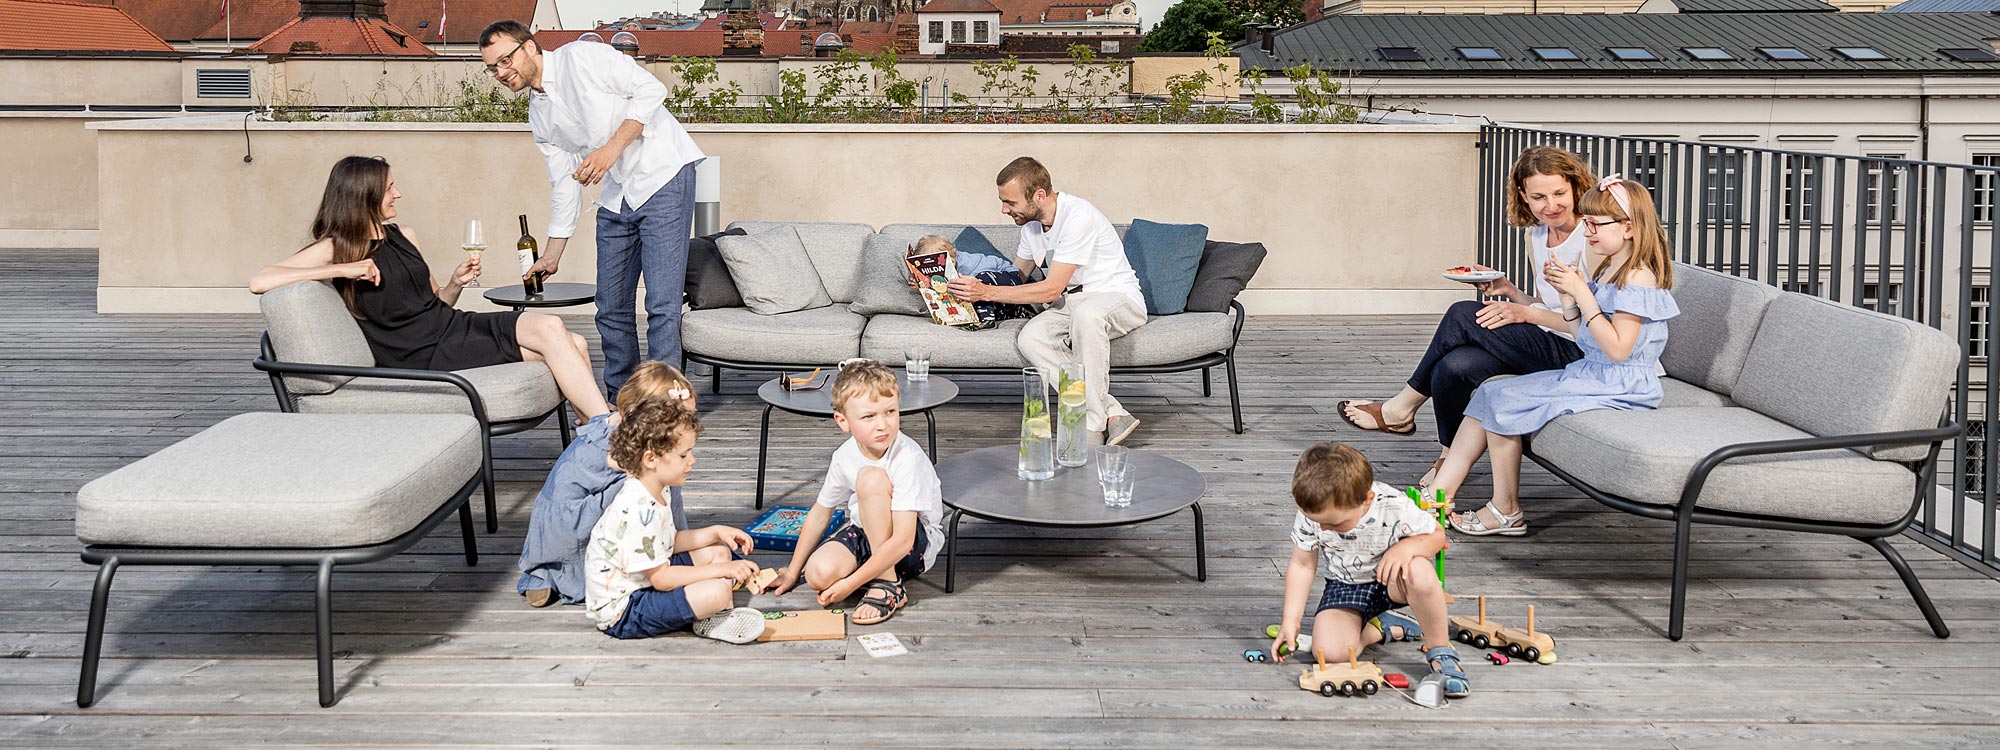 Image of adults and children partying on and around Todus Starling modern outdoor lounge furniture on wooden decked rooftop